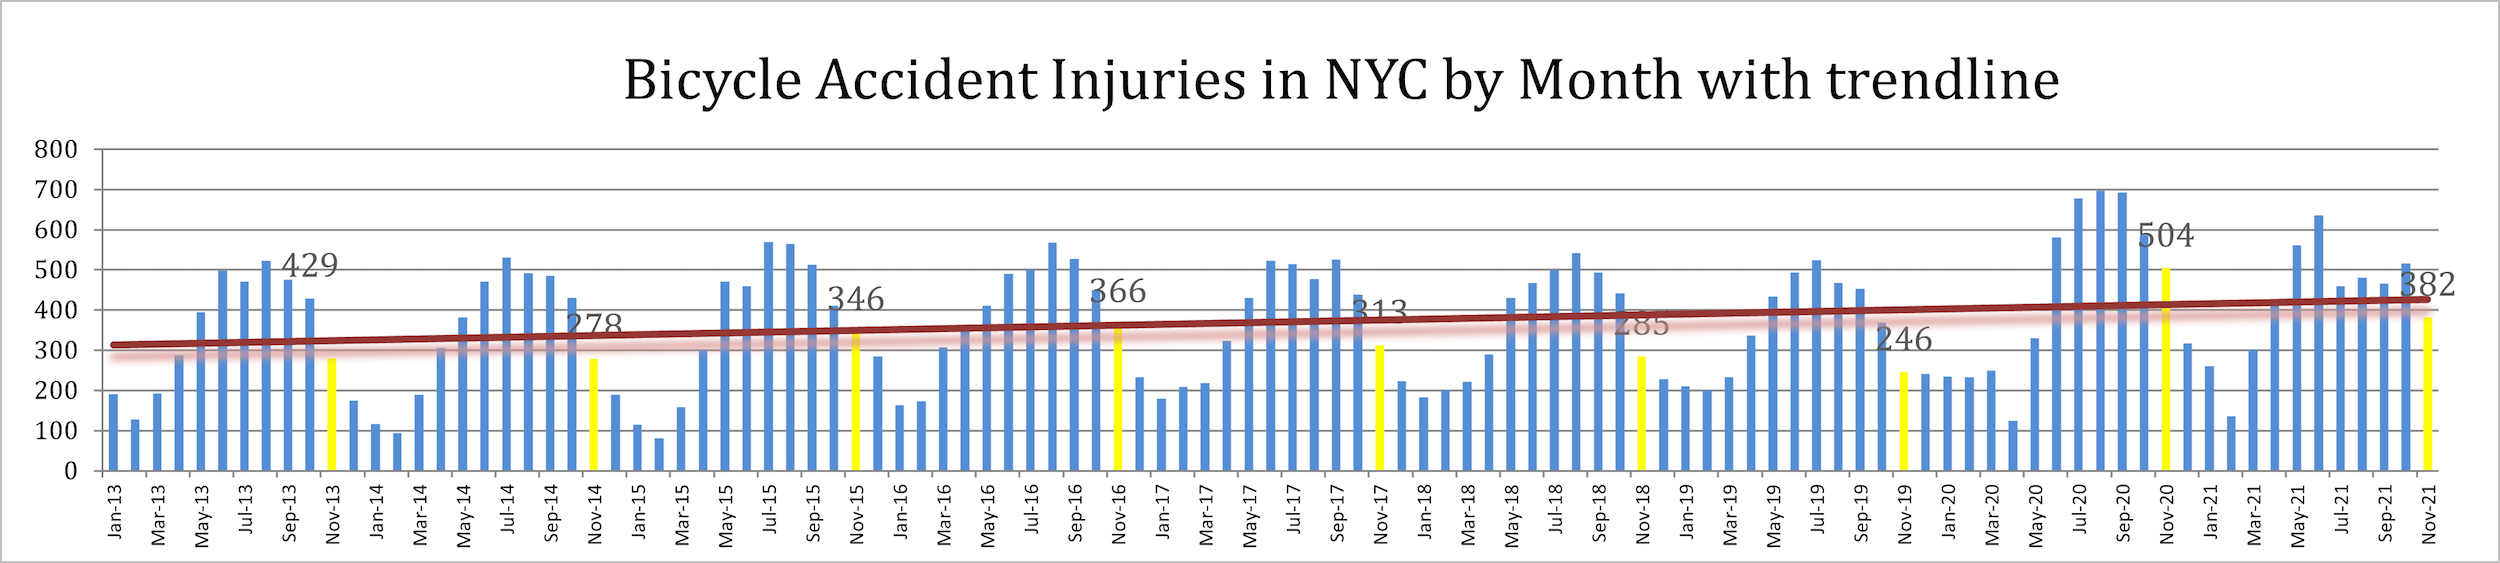 Bicycle Accident Injuries in NYC by Month With Trendline